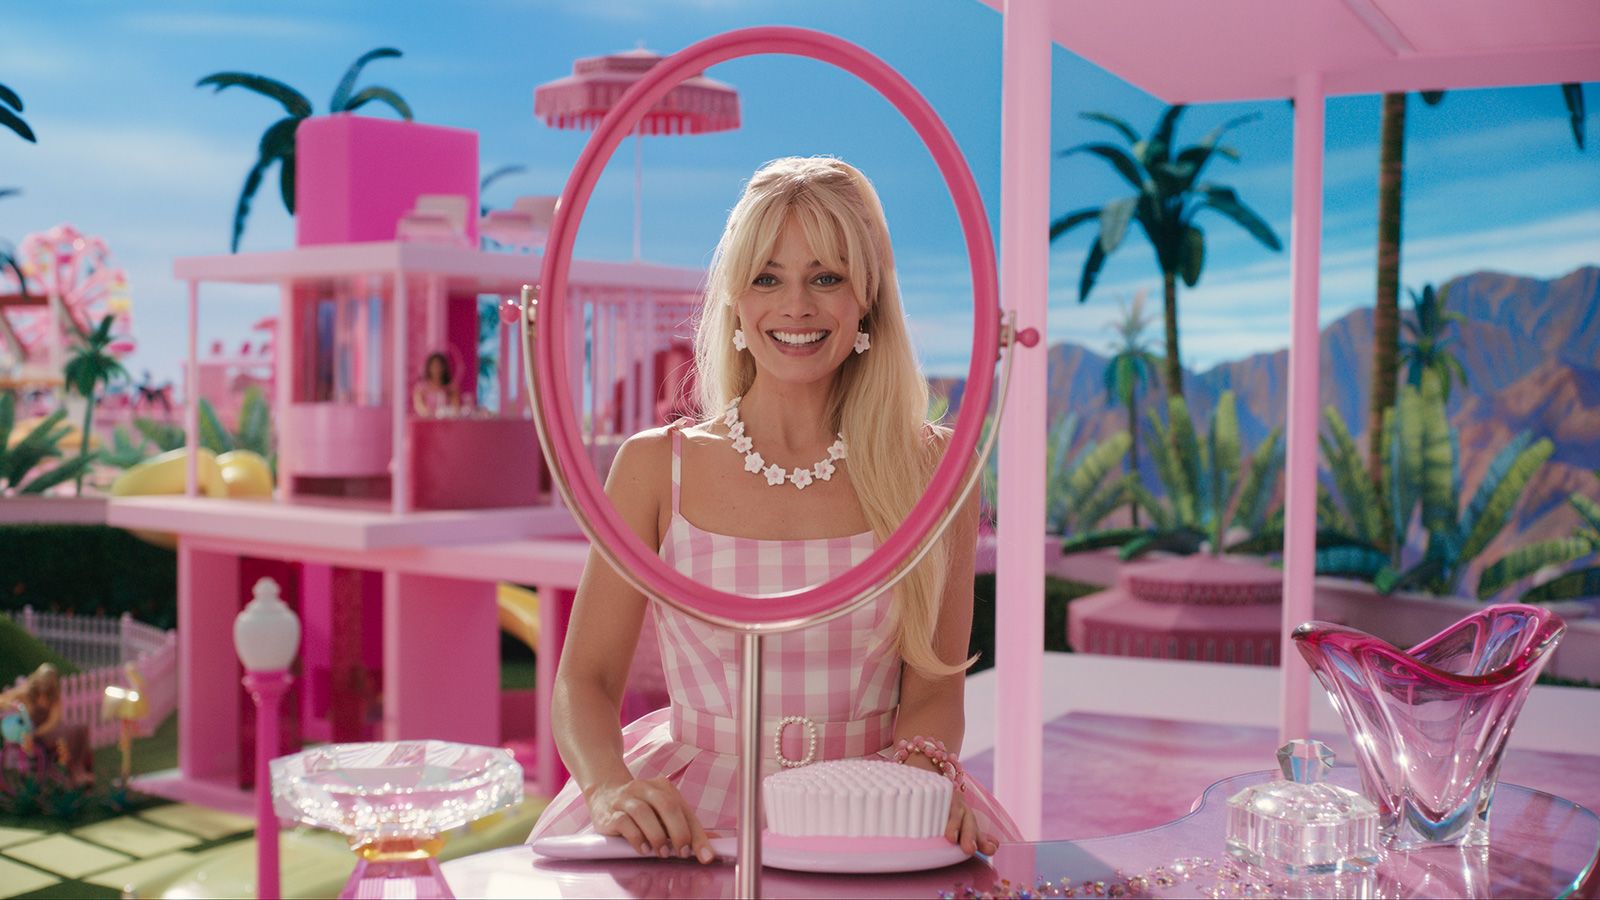 Meaning of 'Shining' in Barbie movie is a reference to classic